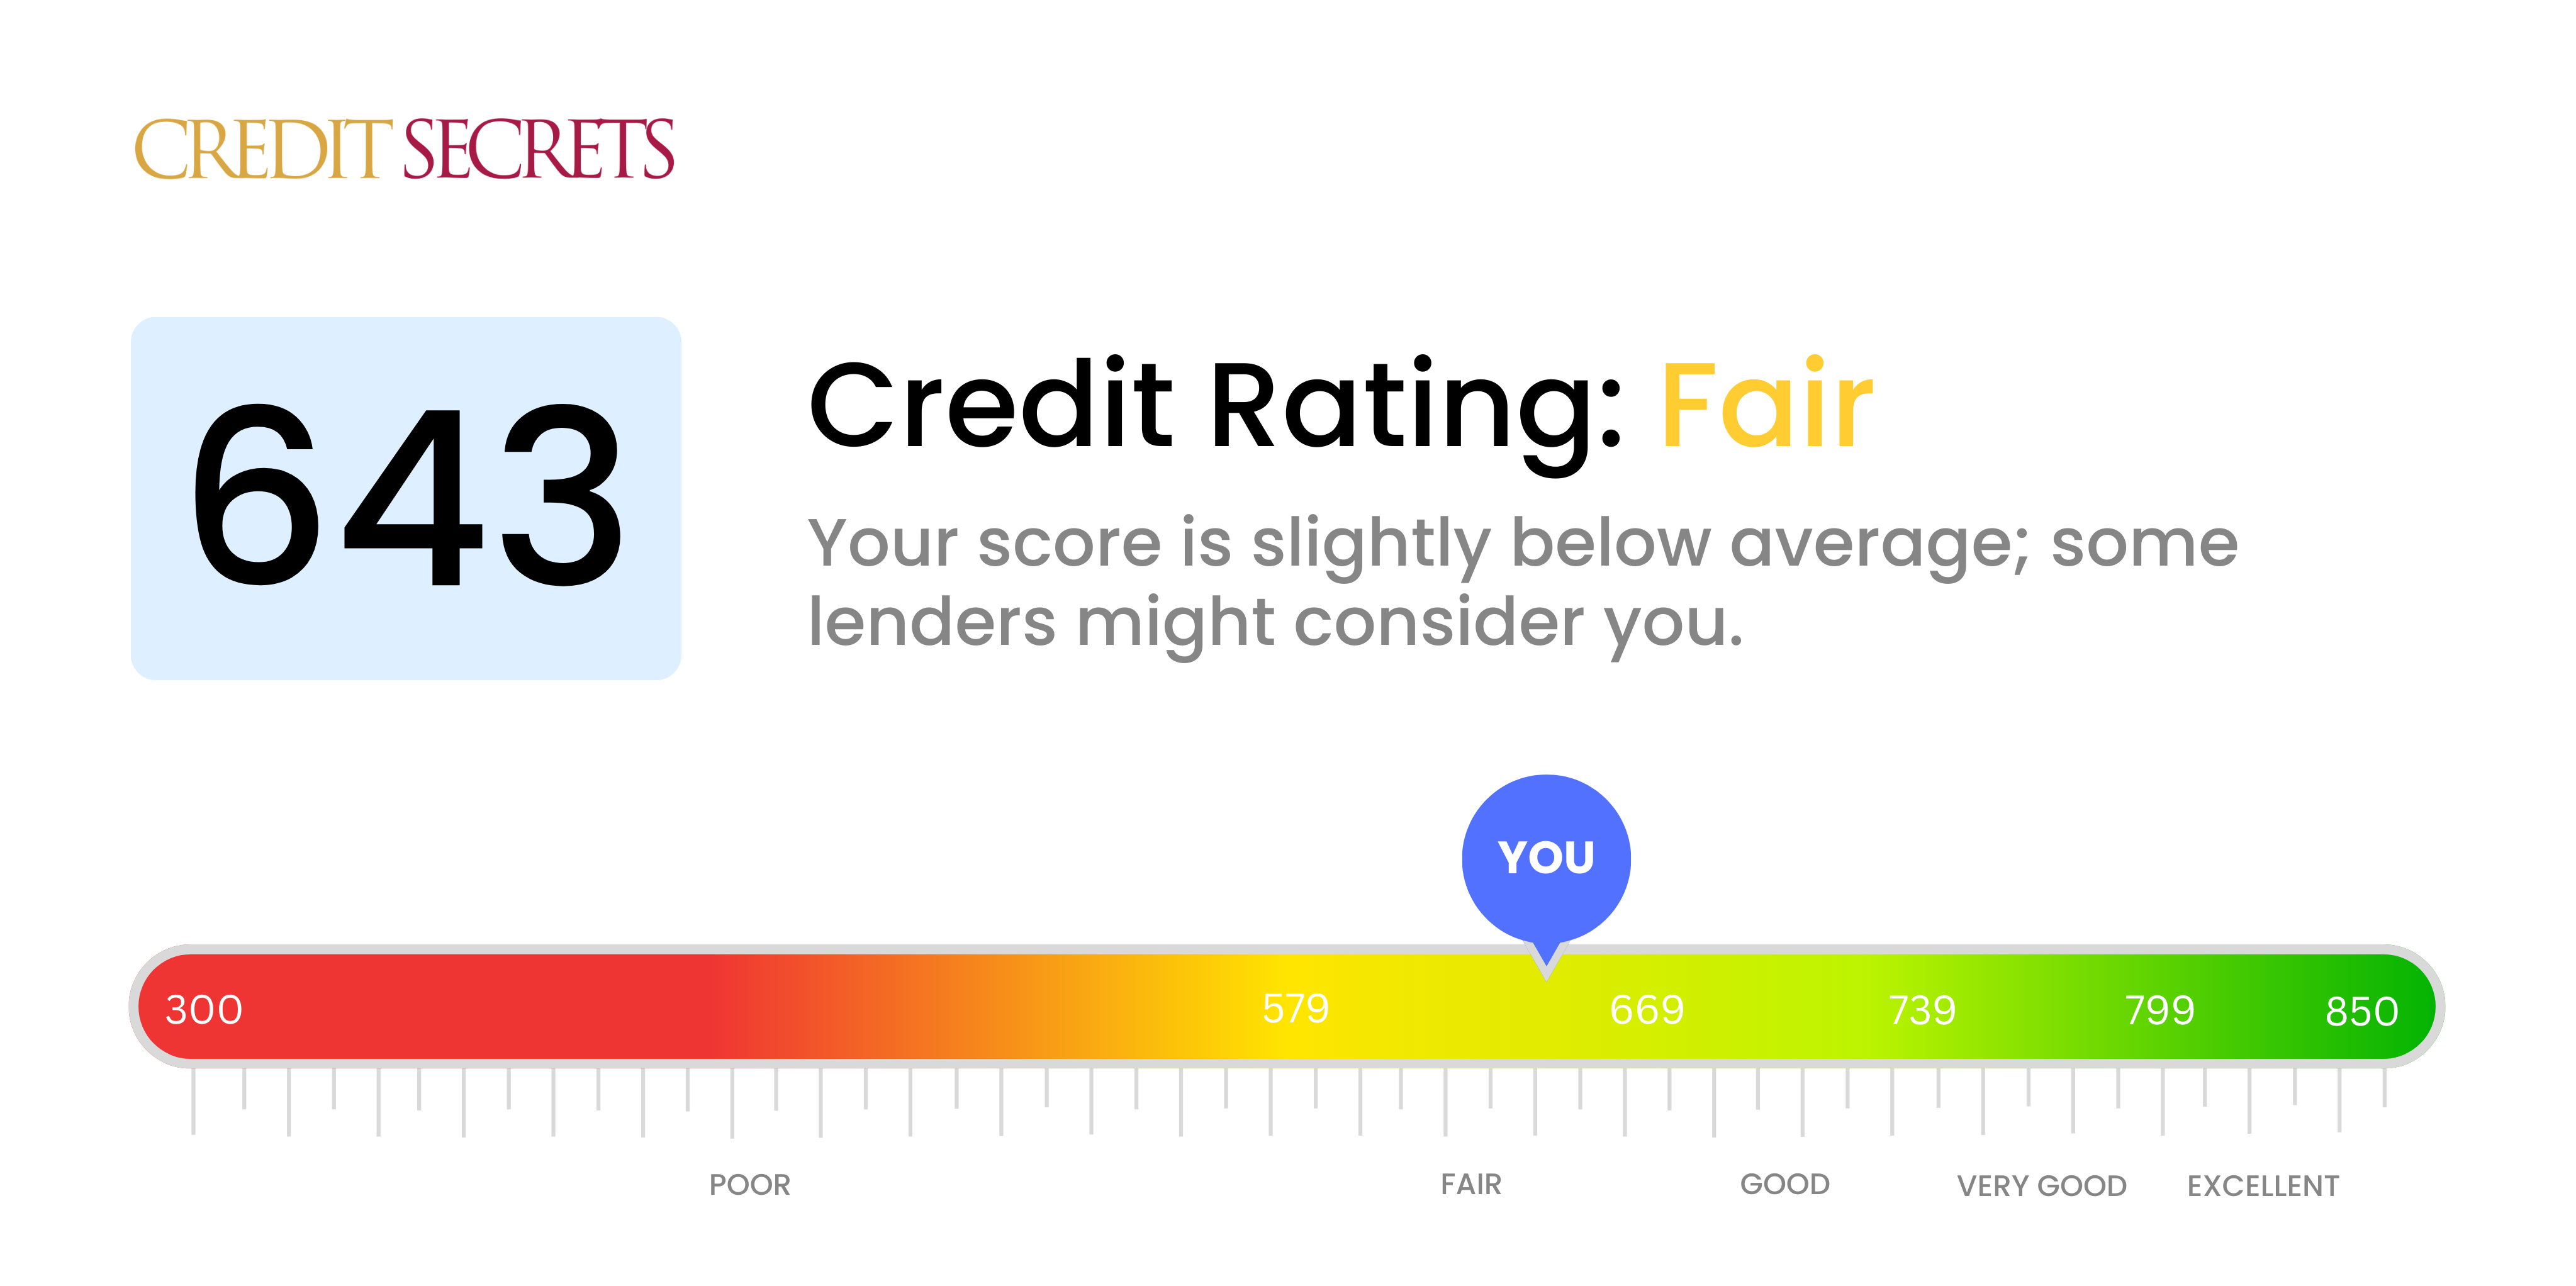 Is 643 a good credit score?